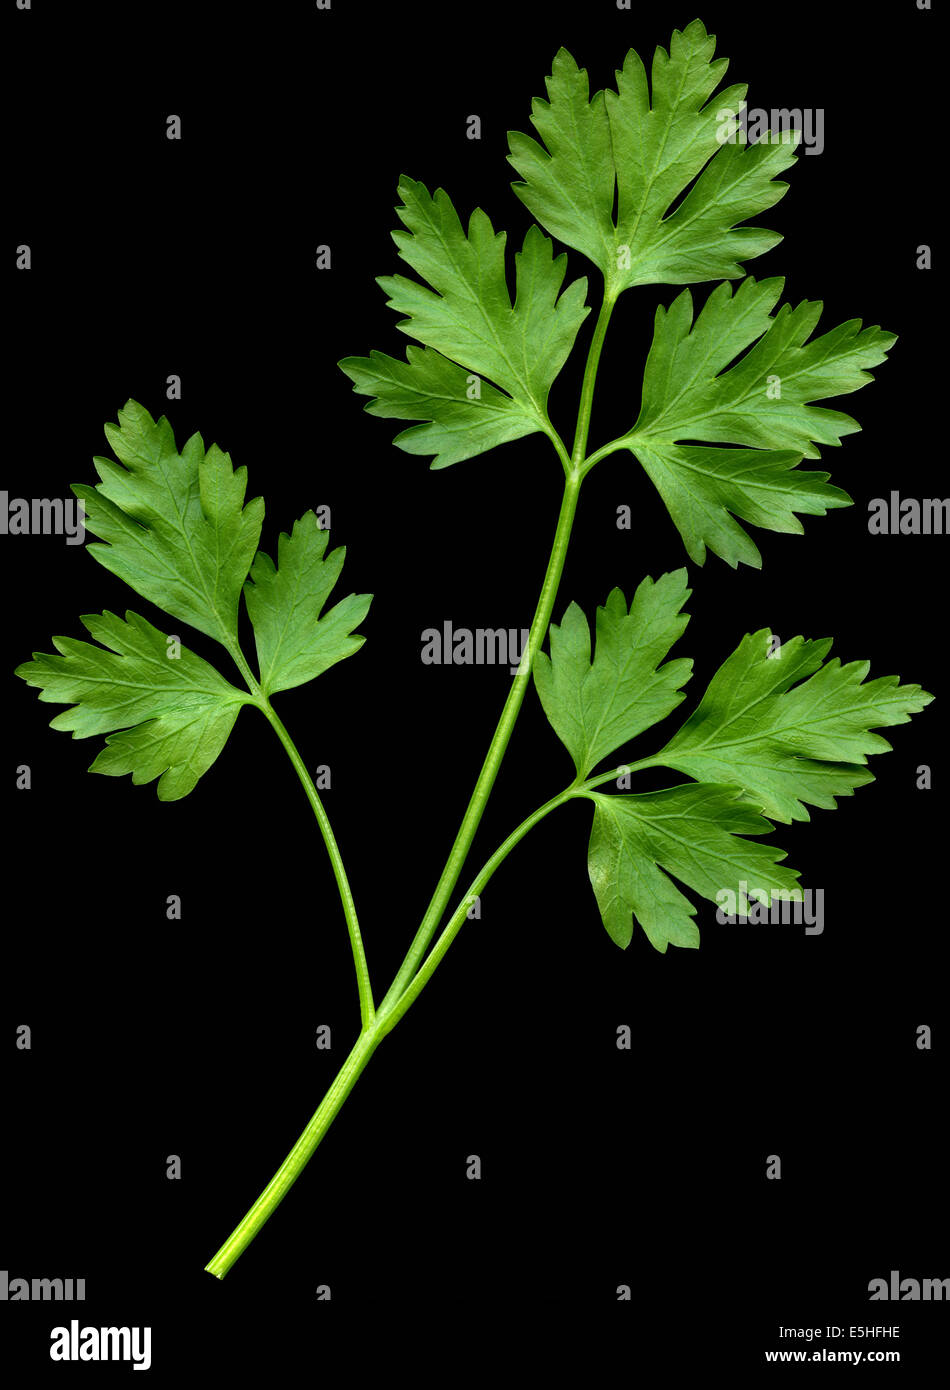 A sprig of flat-leaved parsley flat against a black background Stock Photo